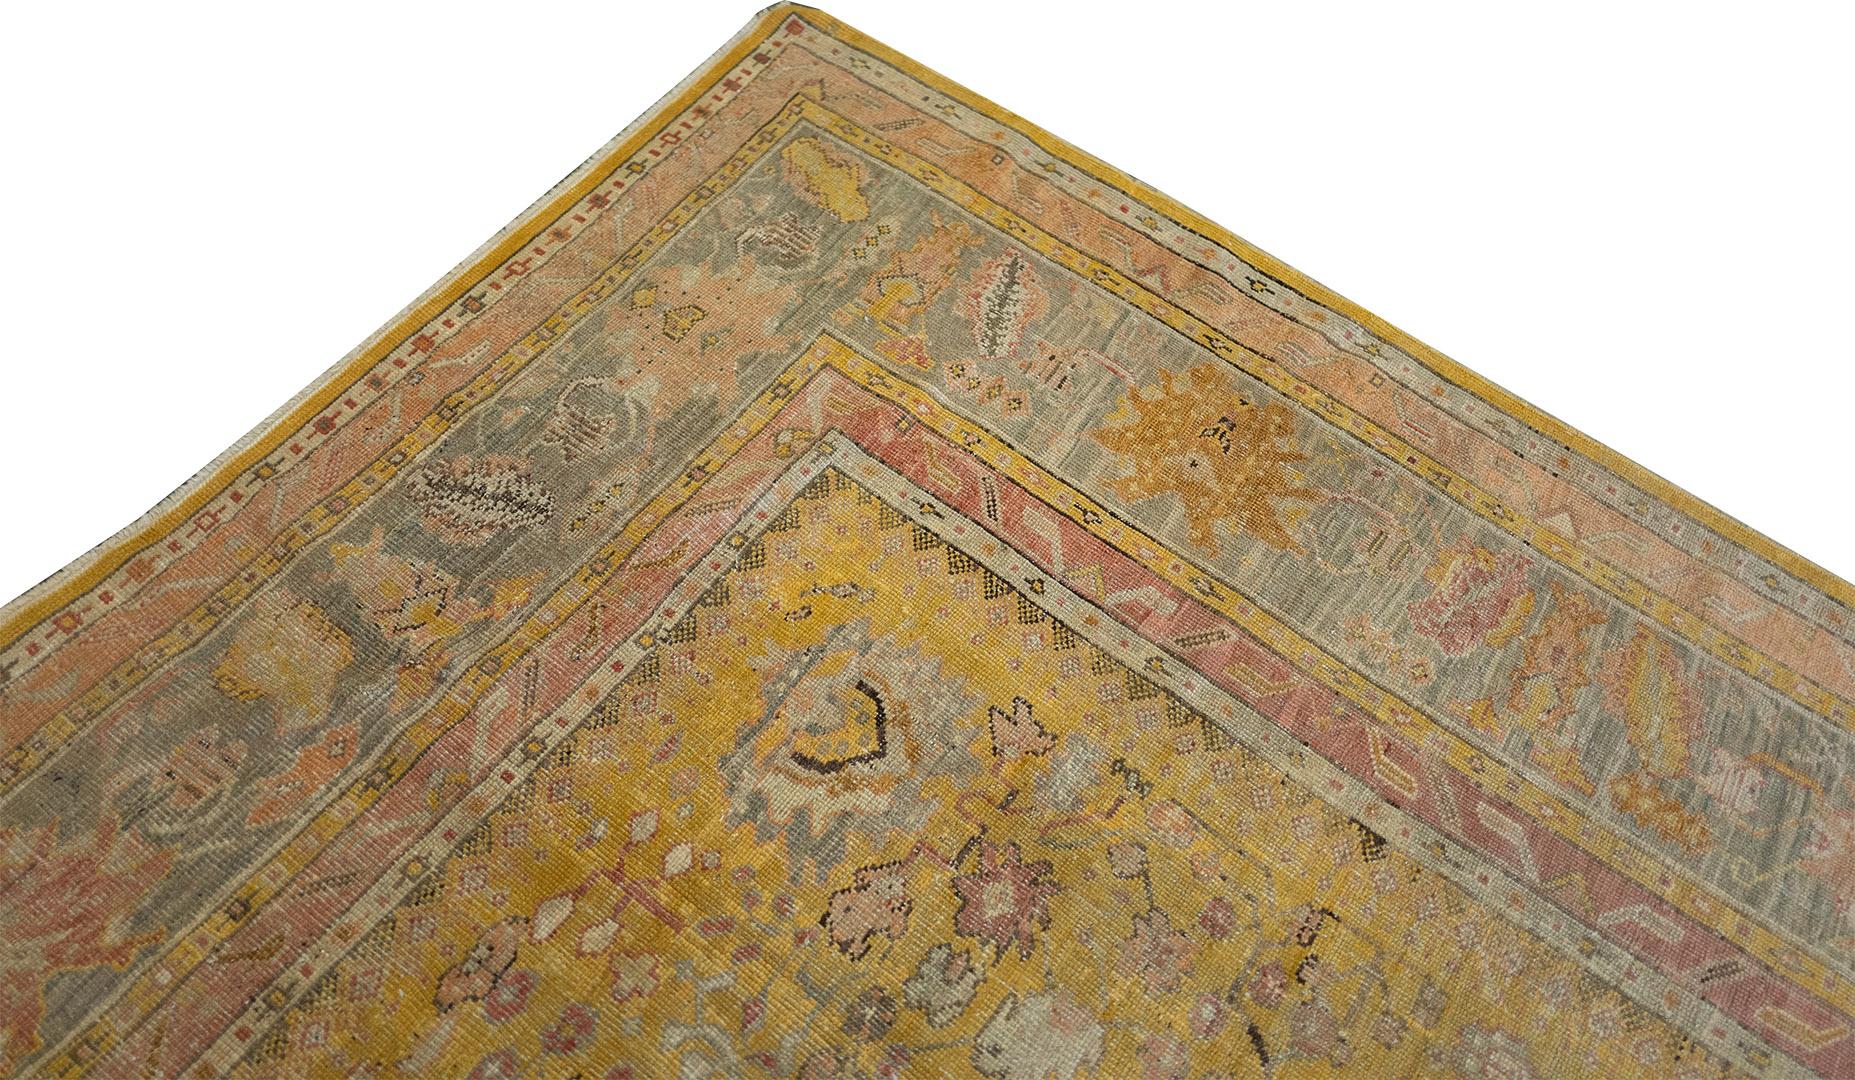 Hand-Knotted Late 19th Century Wool Hand-Woven Oushak Rug from West Anatolia